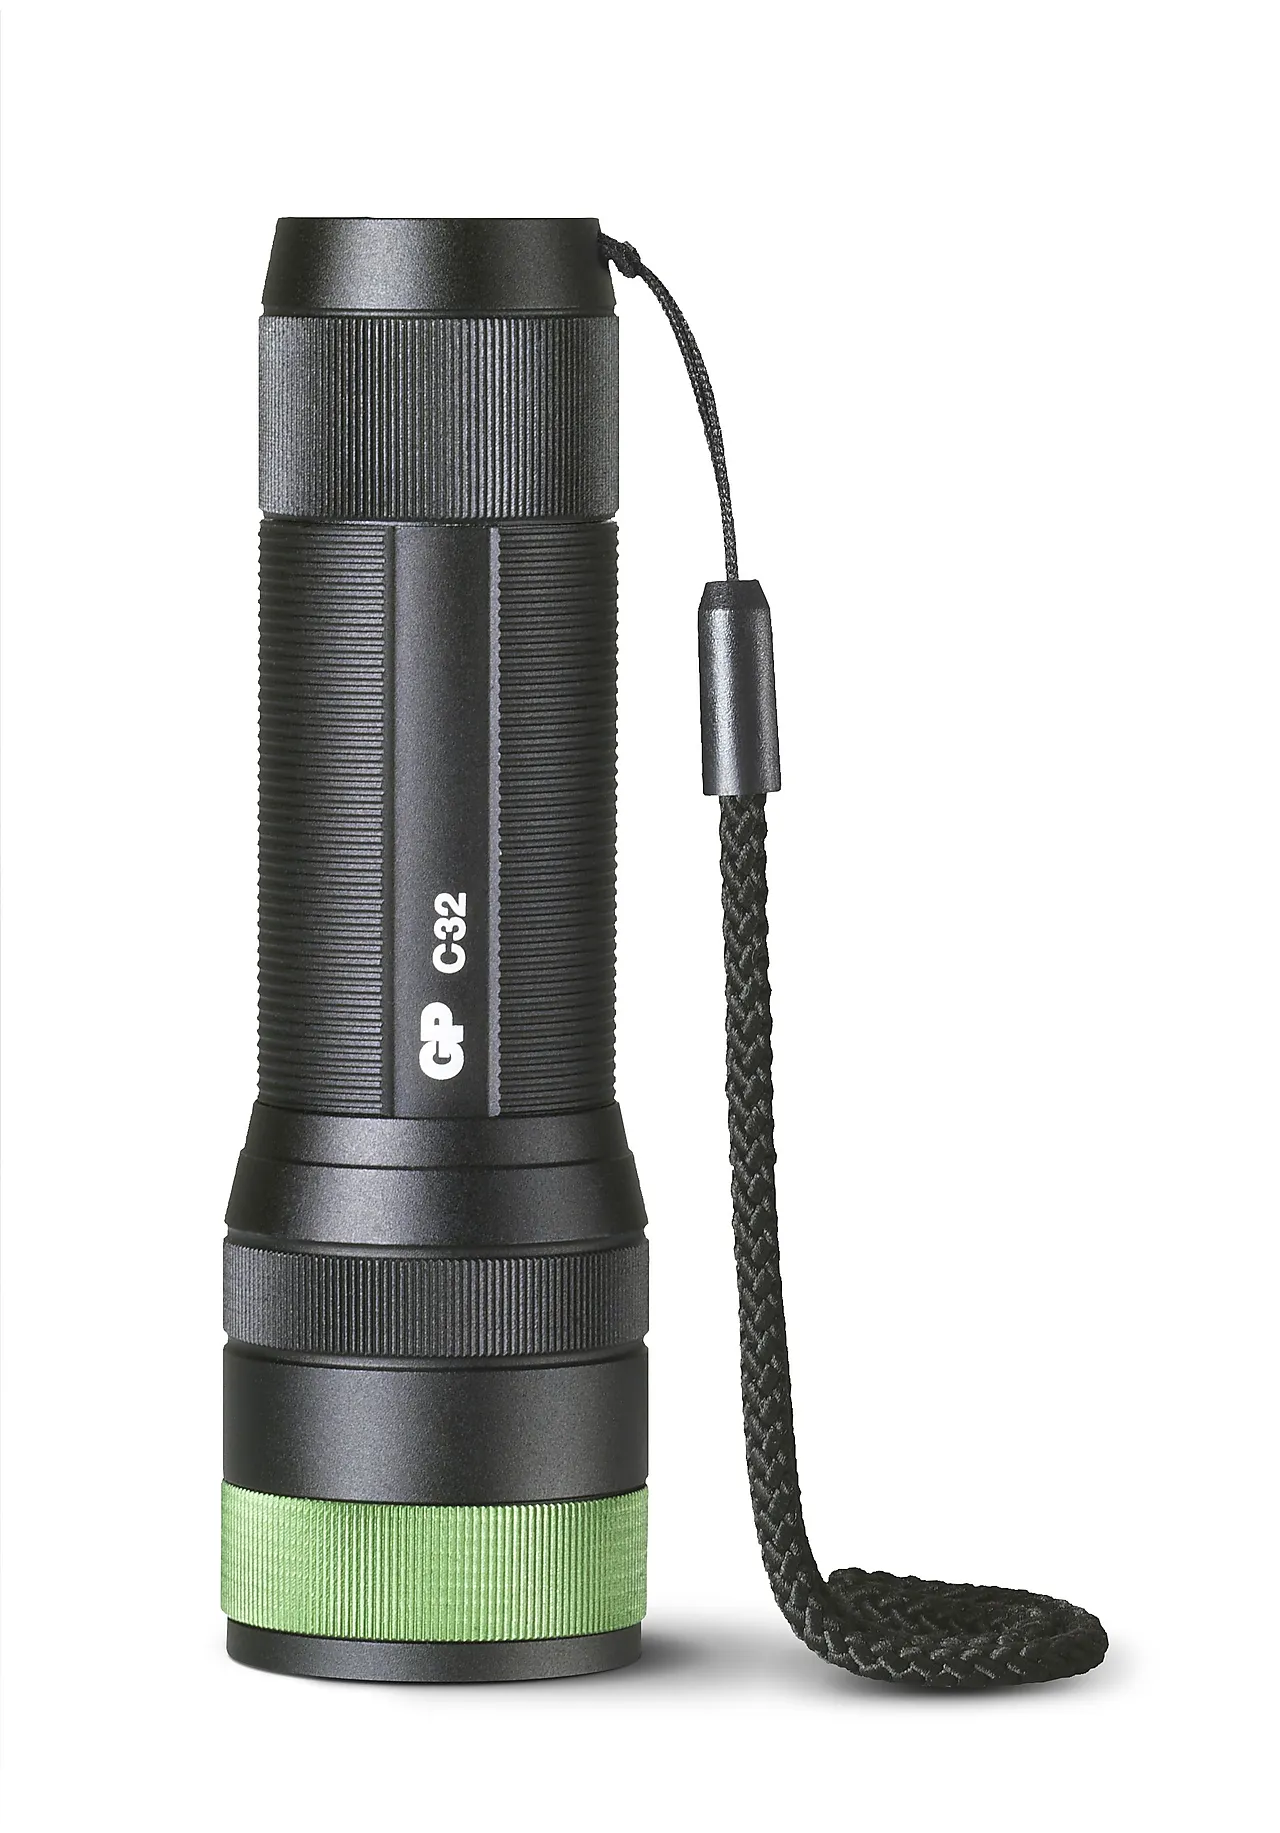 Lommelykt Discovery Lupus C32 300 lumen null - null - 2 - Miniatyr